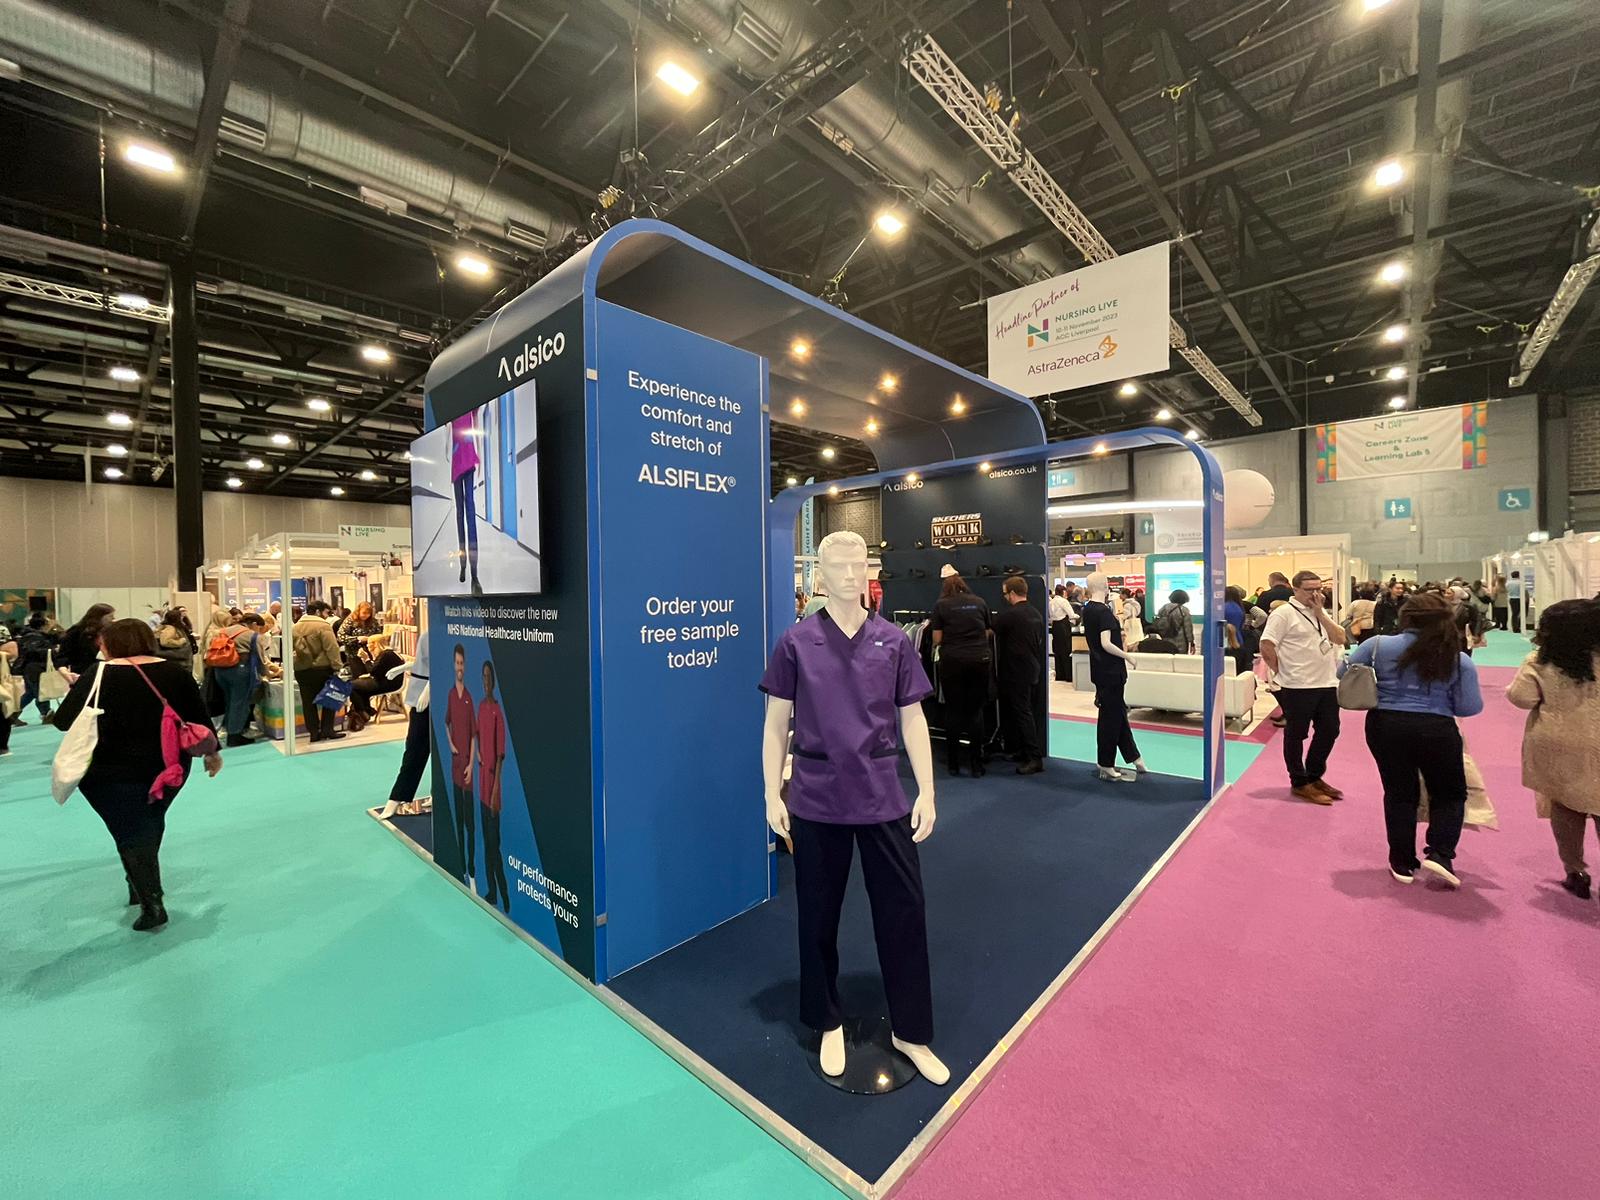 Alsico trade show stand at Nursing Live with mannequin wearing purple healthcare uniform.